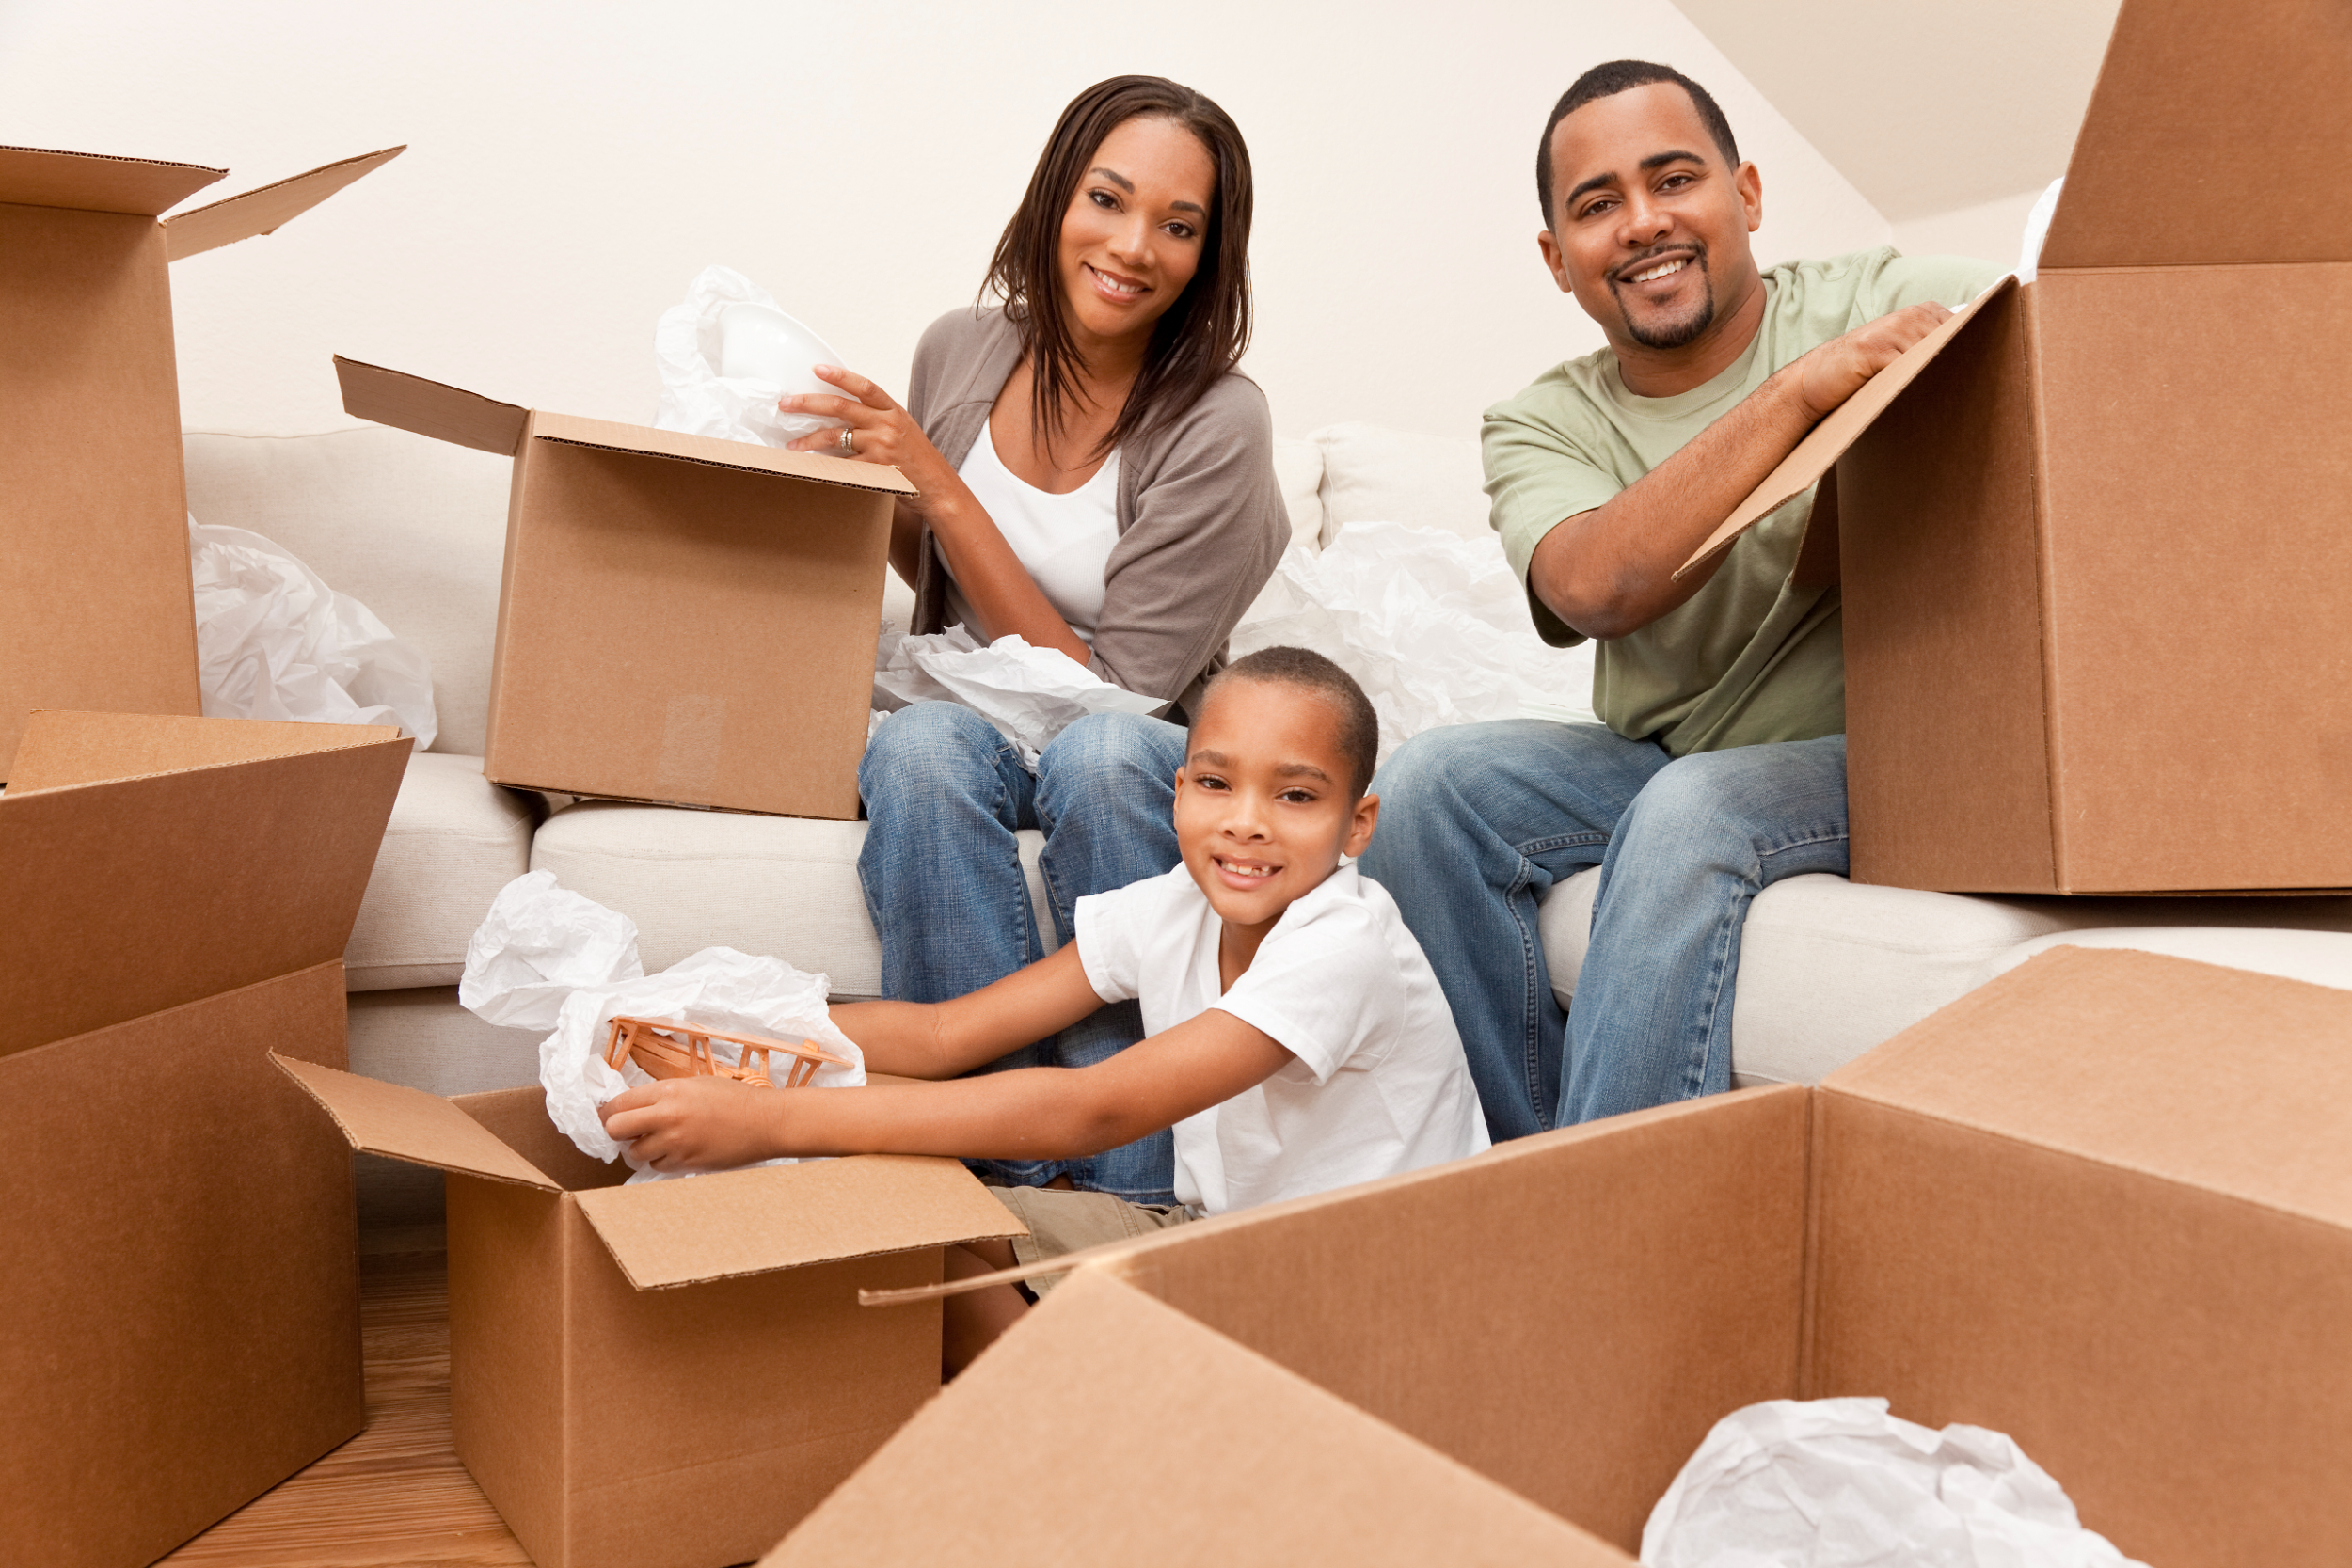 A young family smiling with moving boxes